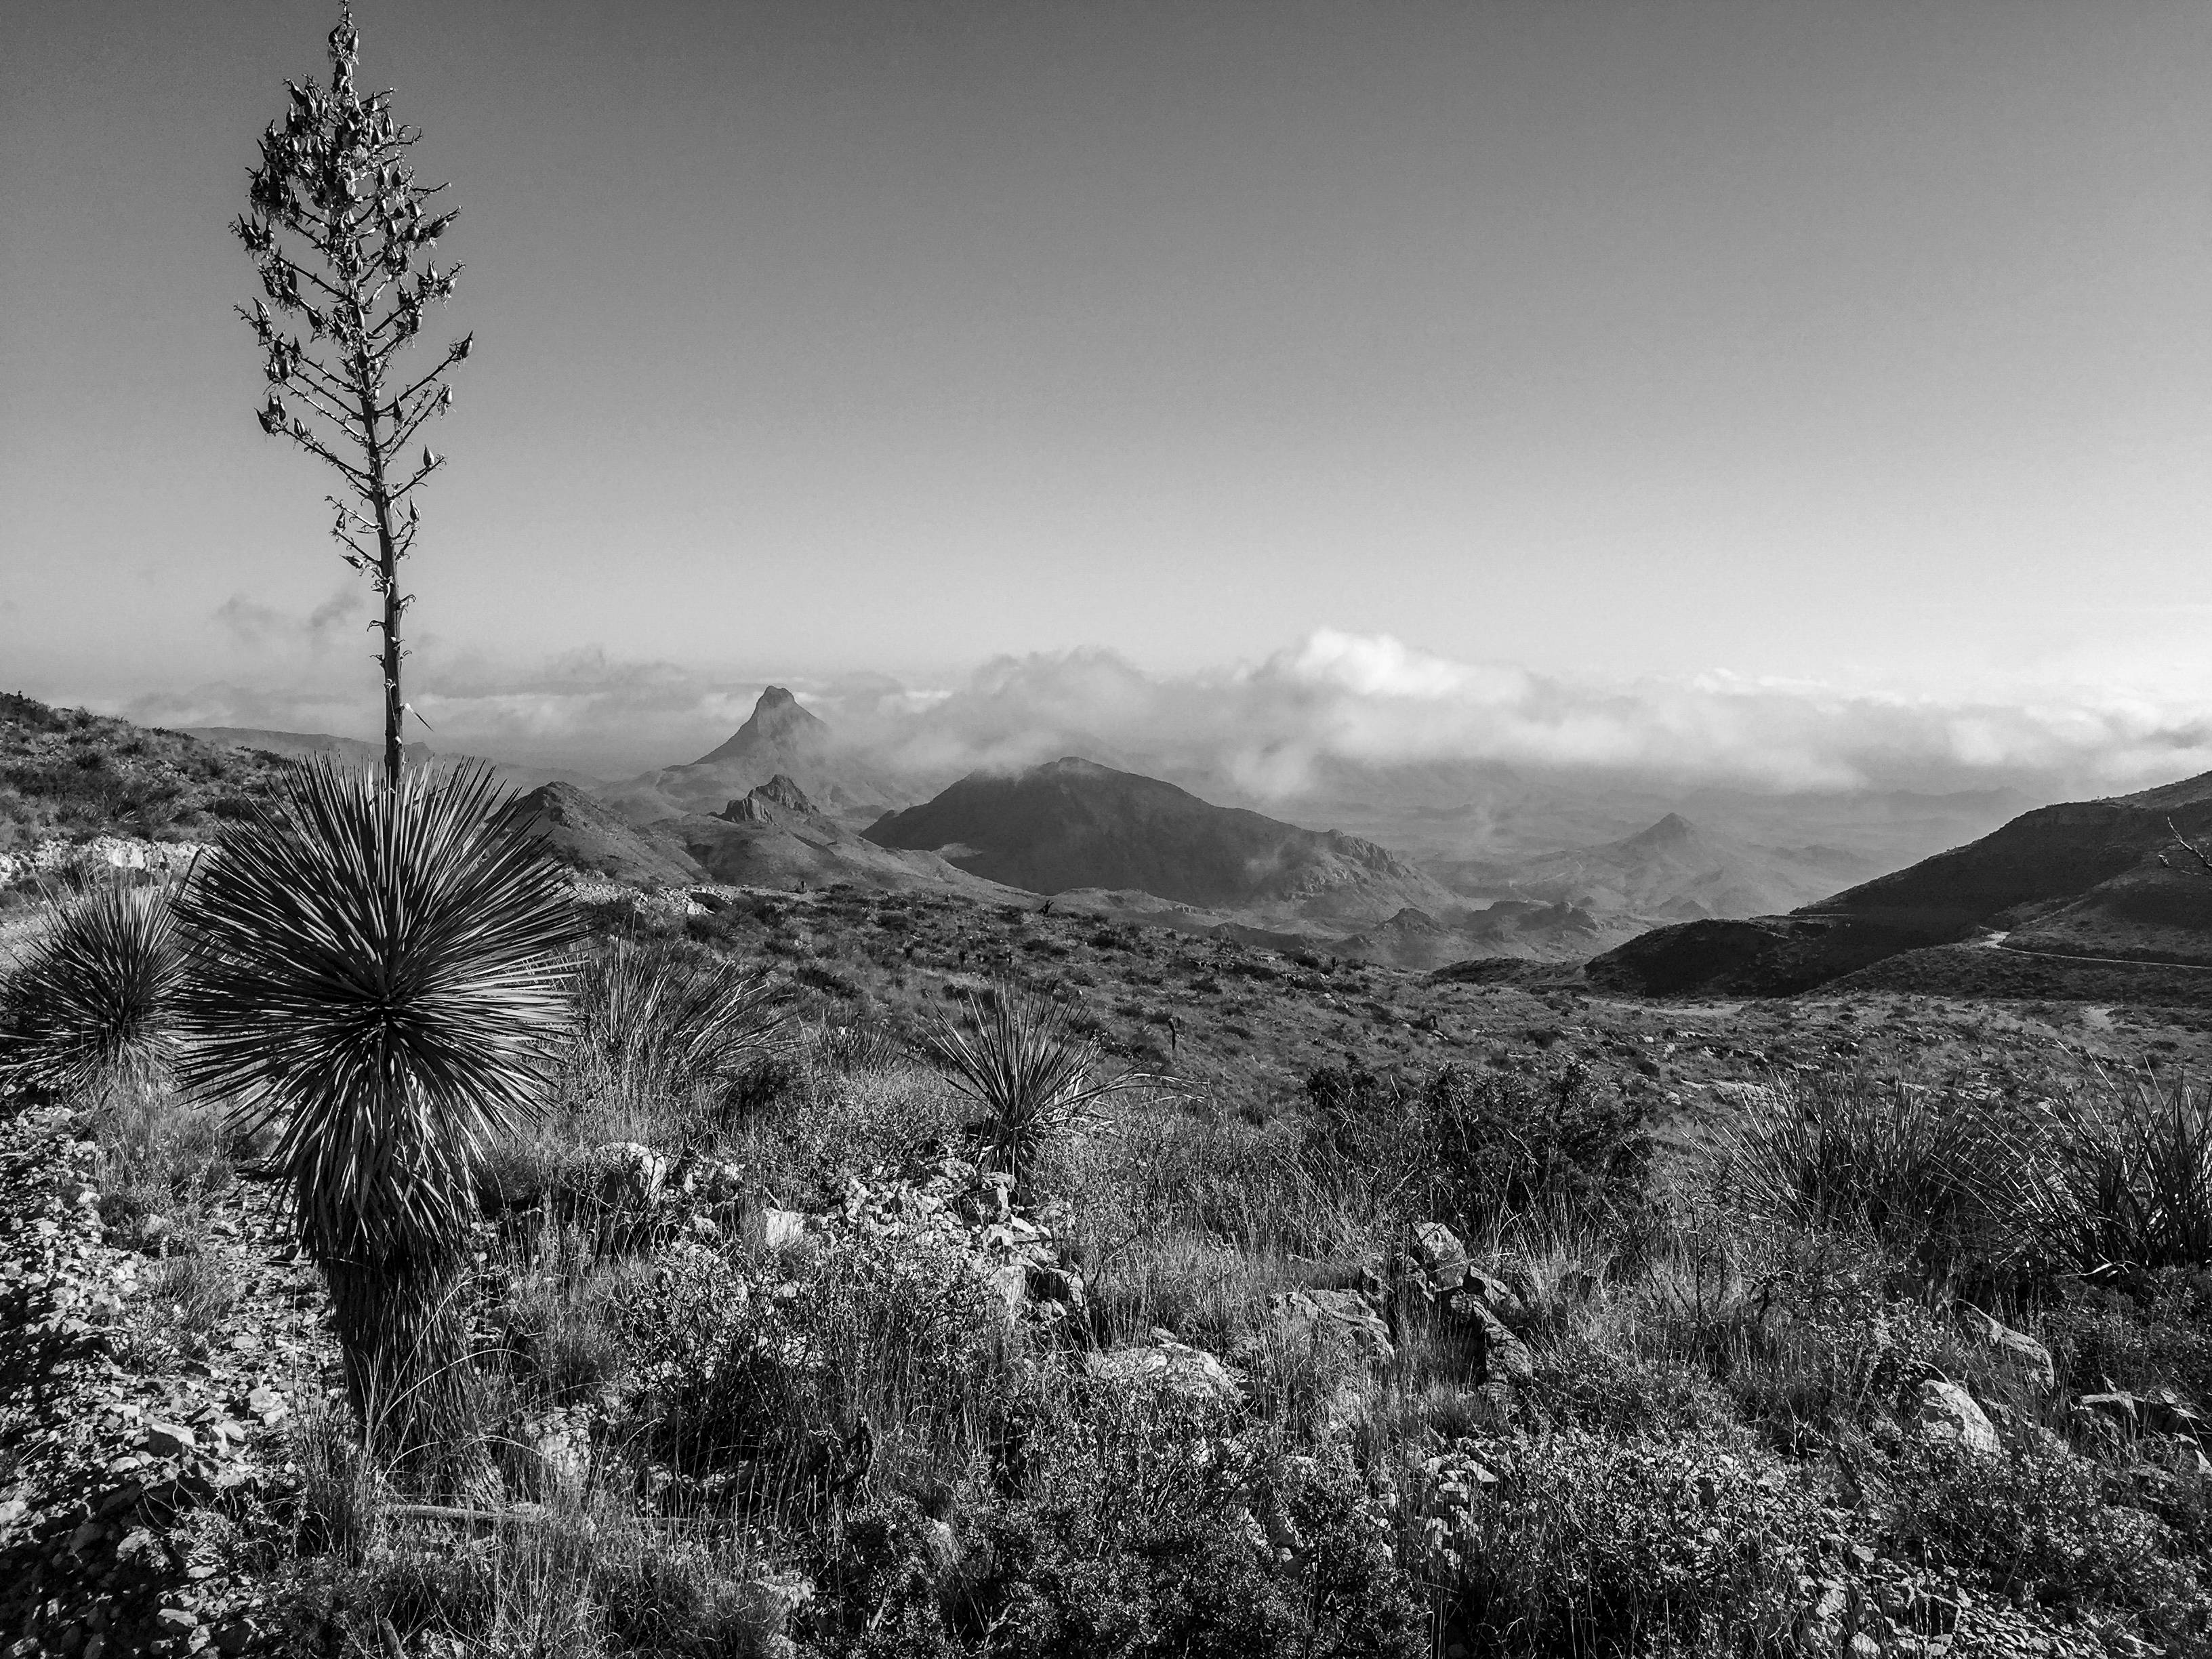 a black and white image of a mountain range